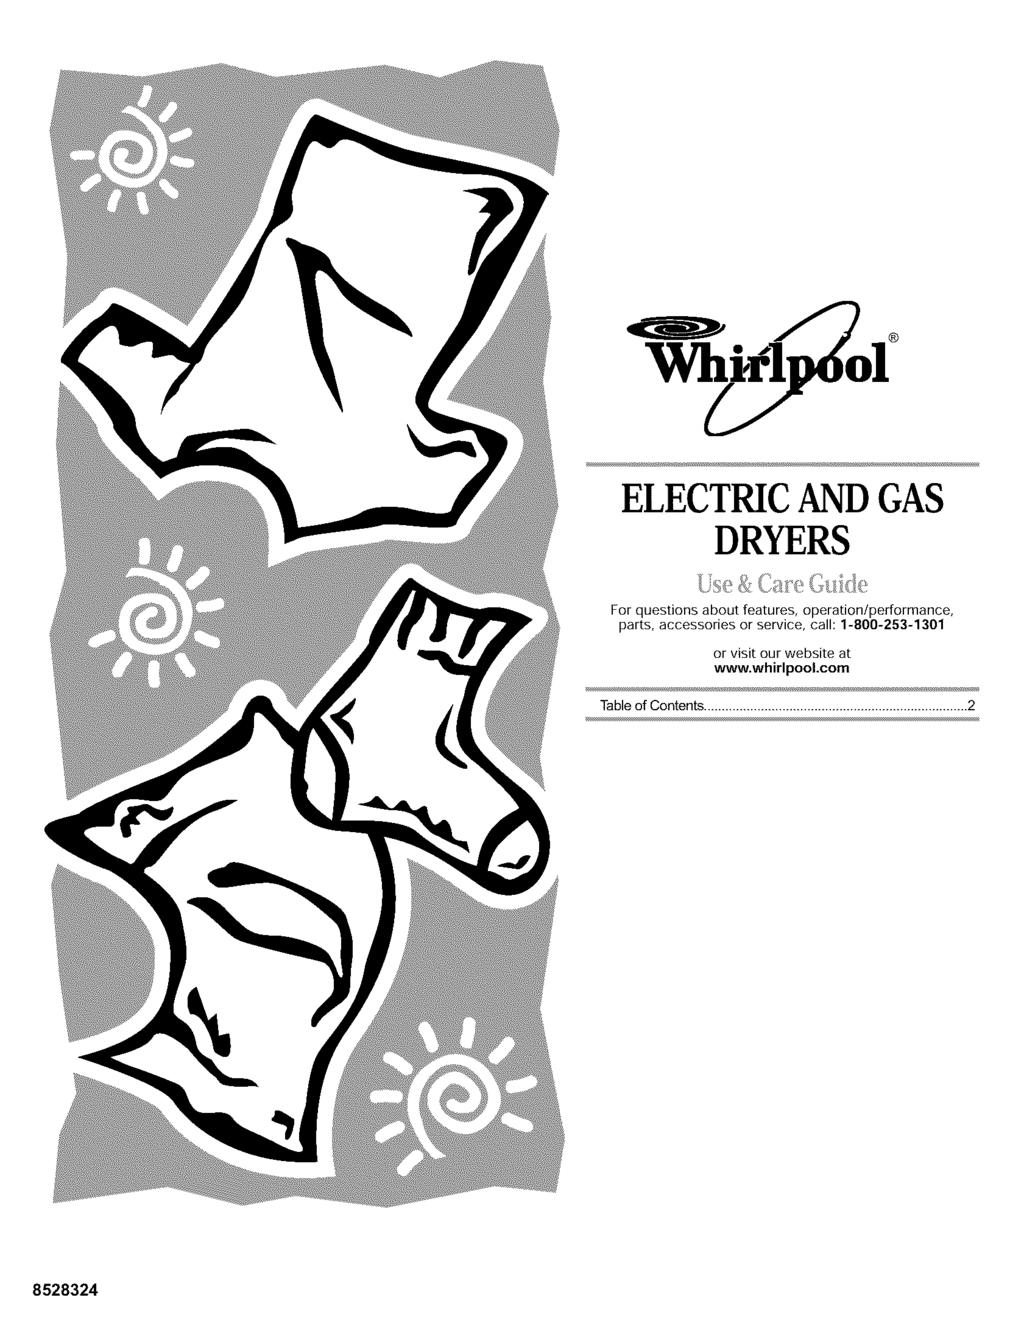 ELECTRICAND GAS DRYERS For questions about features, operation/performance, parts, accessories or